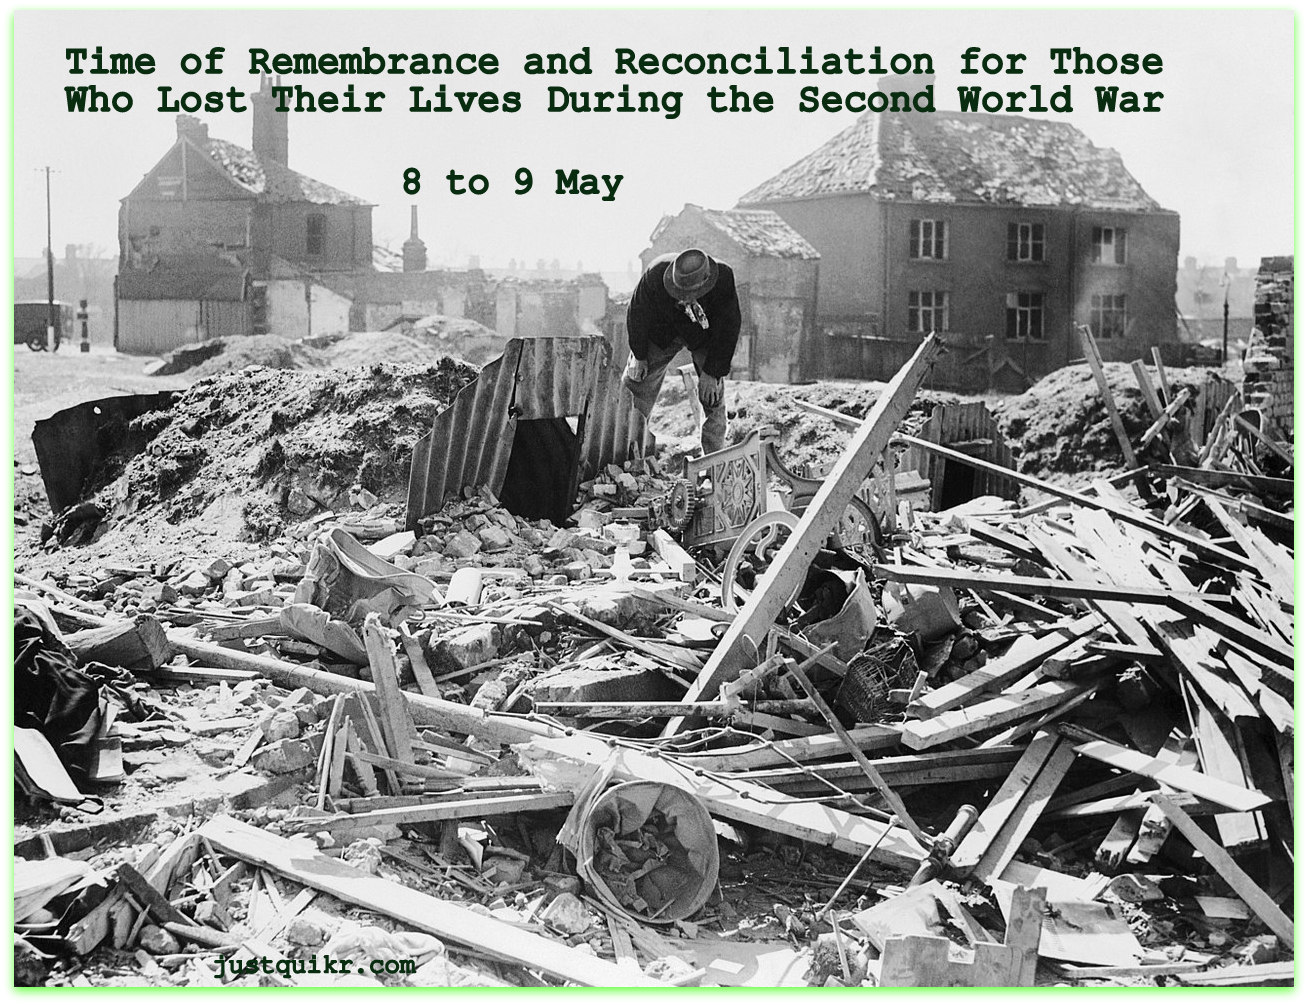 Time of Remembrance and Reconciliation for Those Who Lost Their Lives During the Second World War